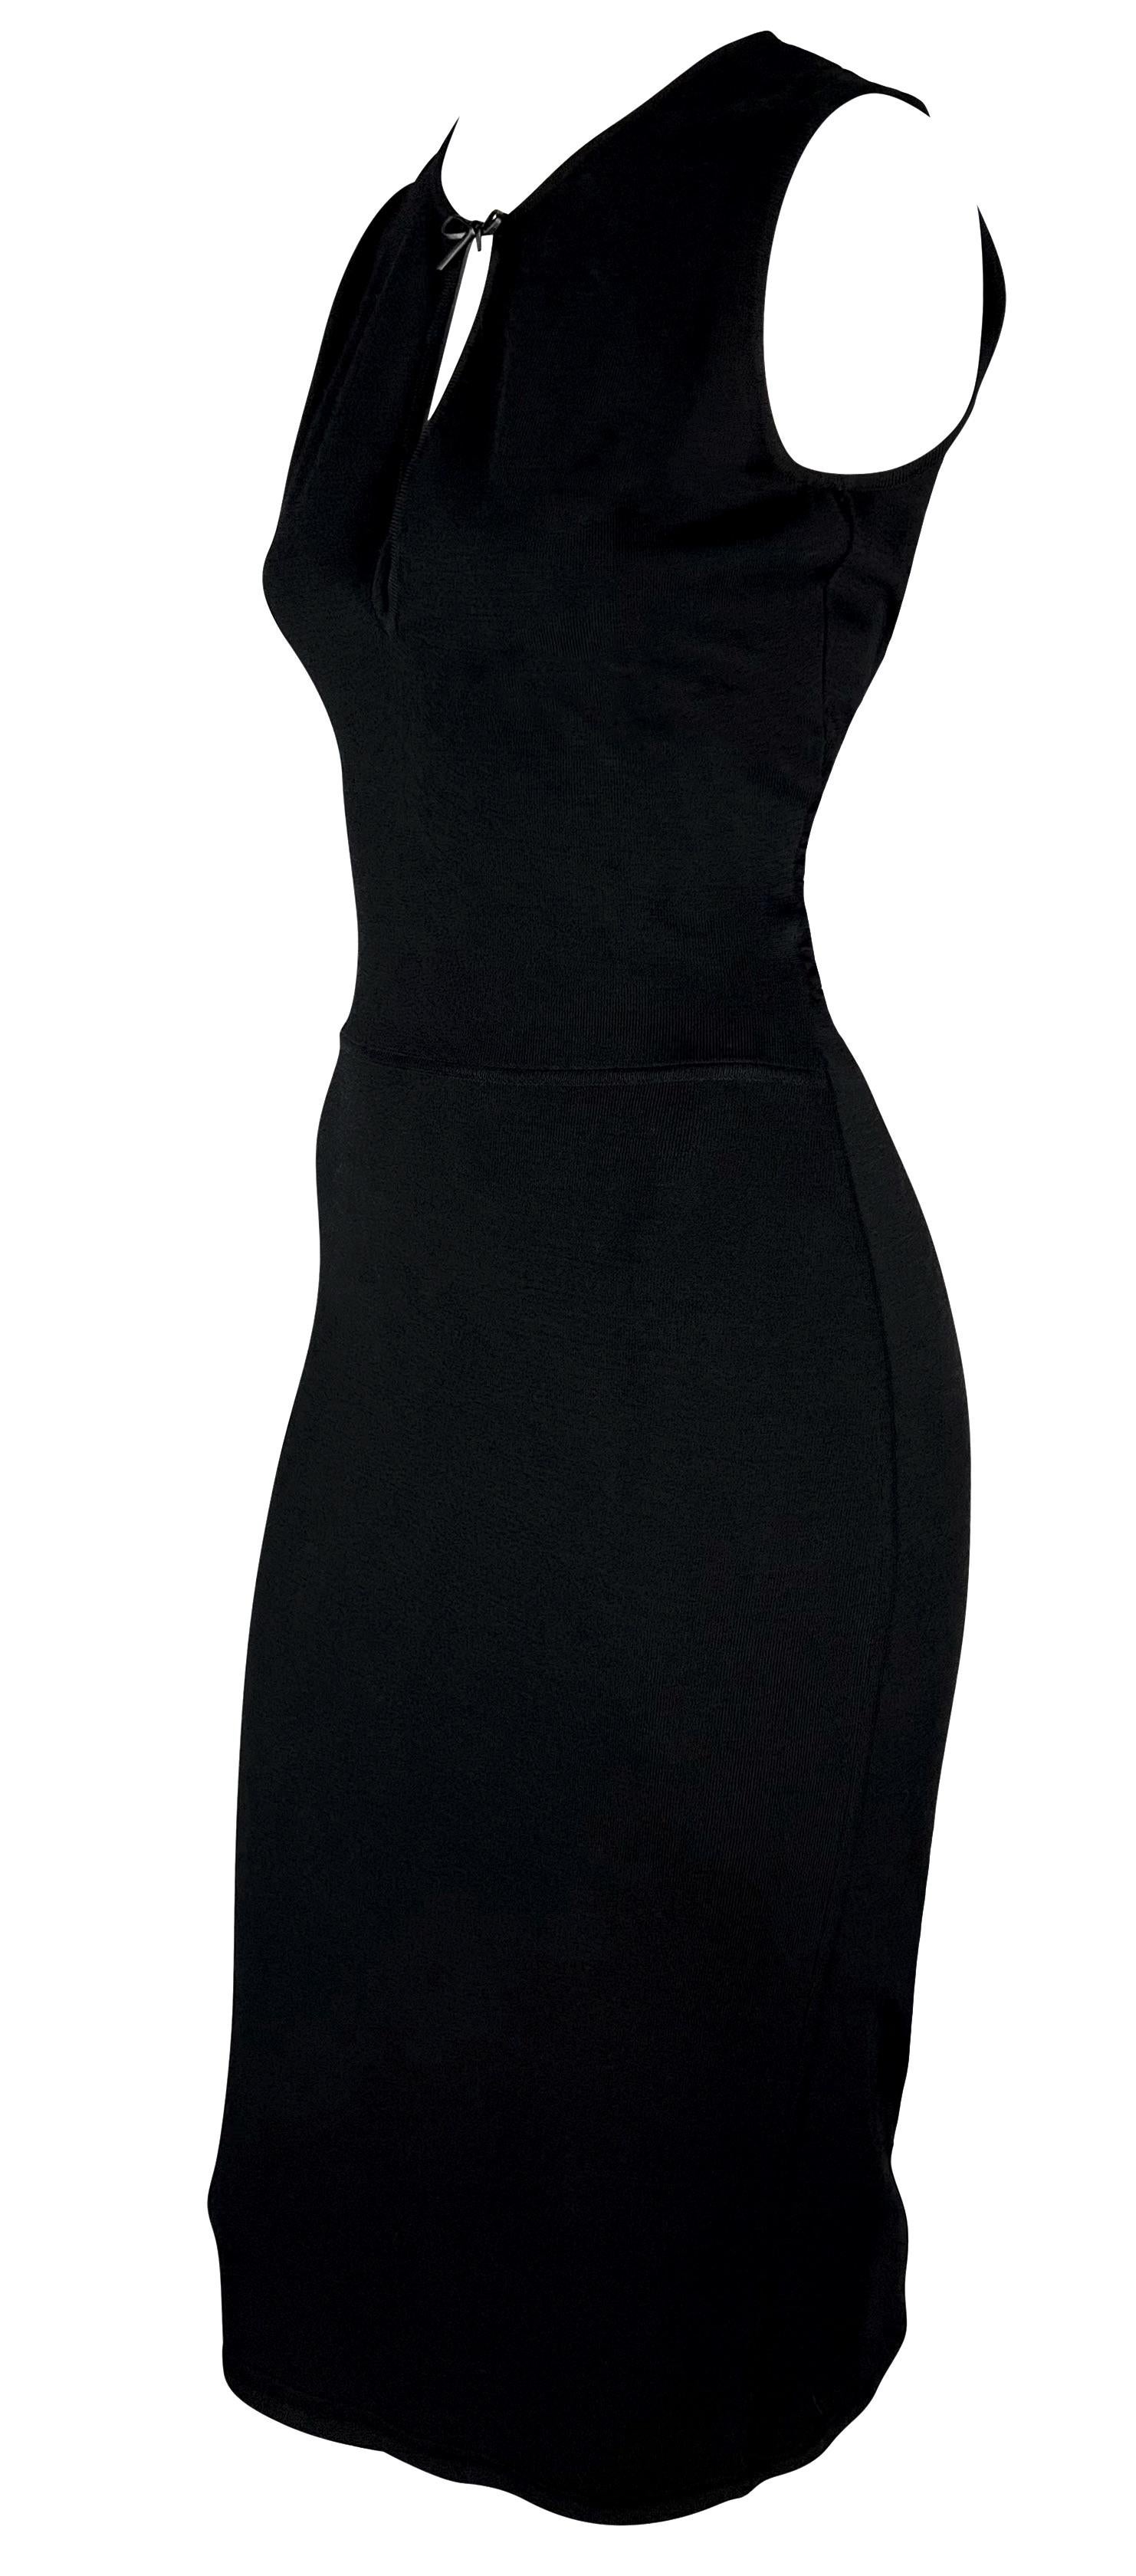 S/S 2000 Gucci by Tom Ford Black Stretch Knit Leather Bow Sleeveless Dress In Excellent Condition For Sale In West Hollywood, CA